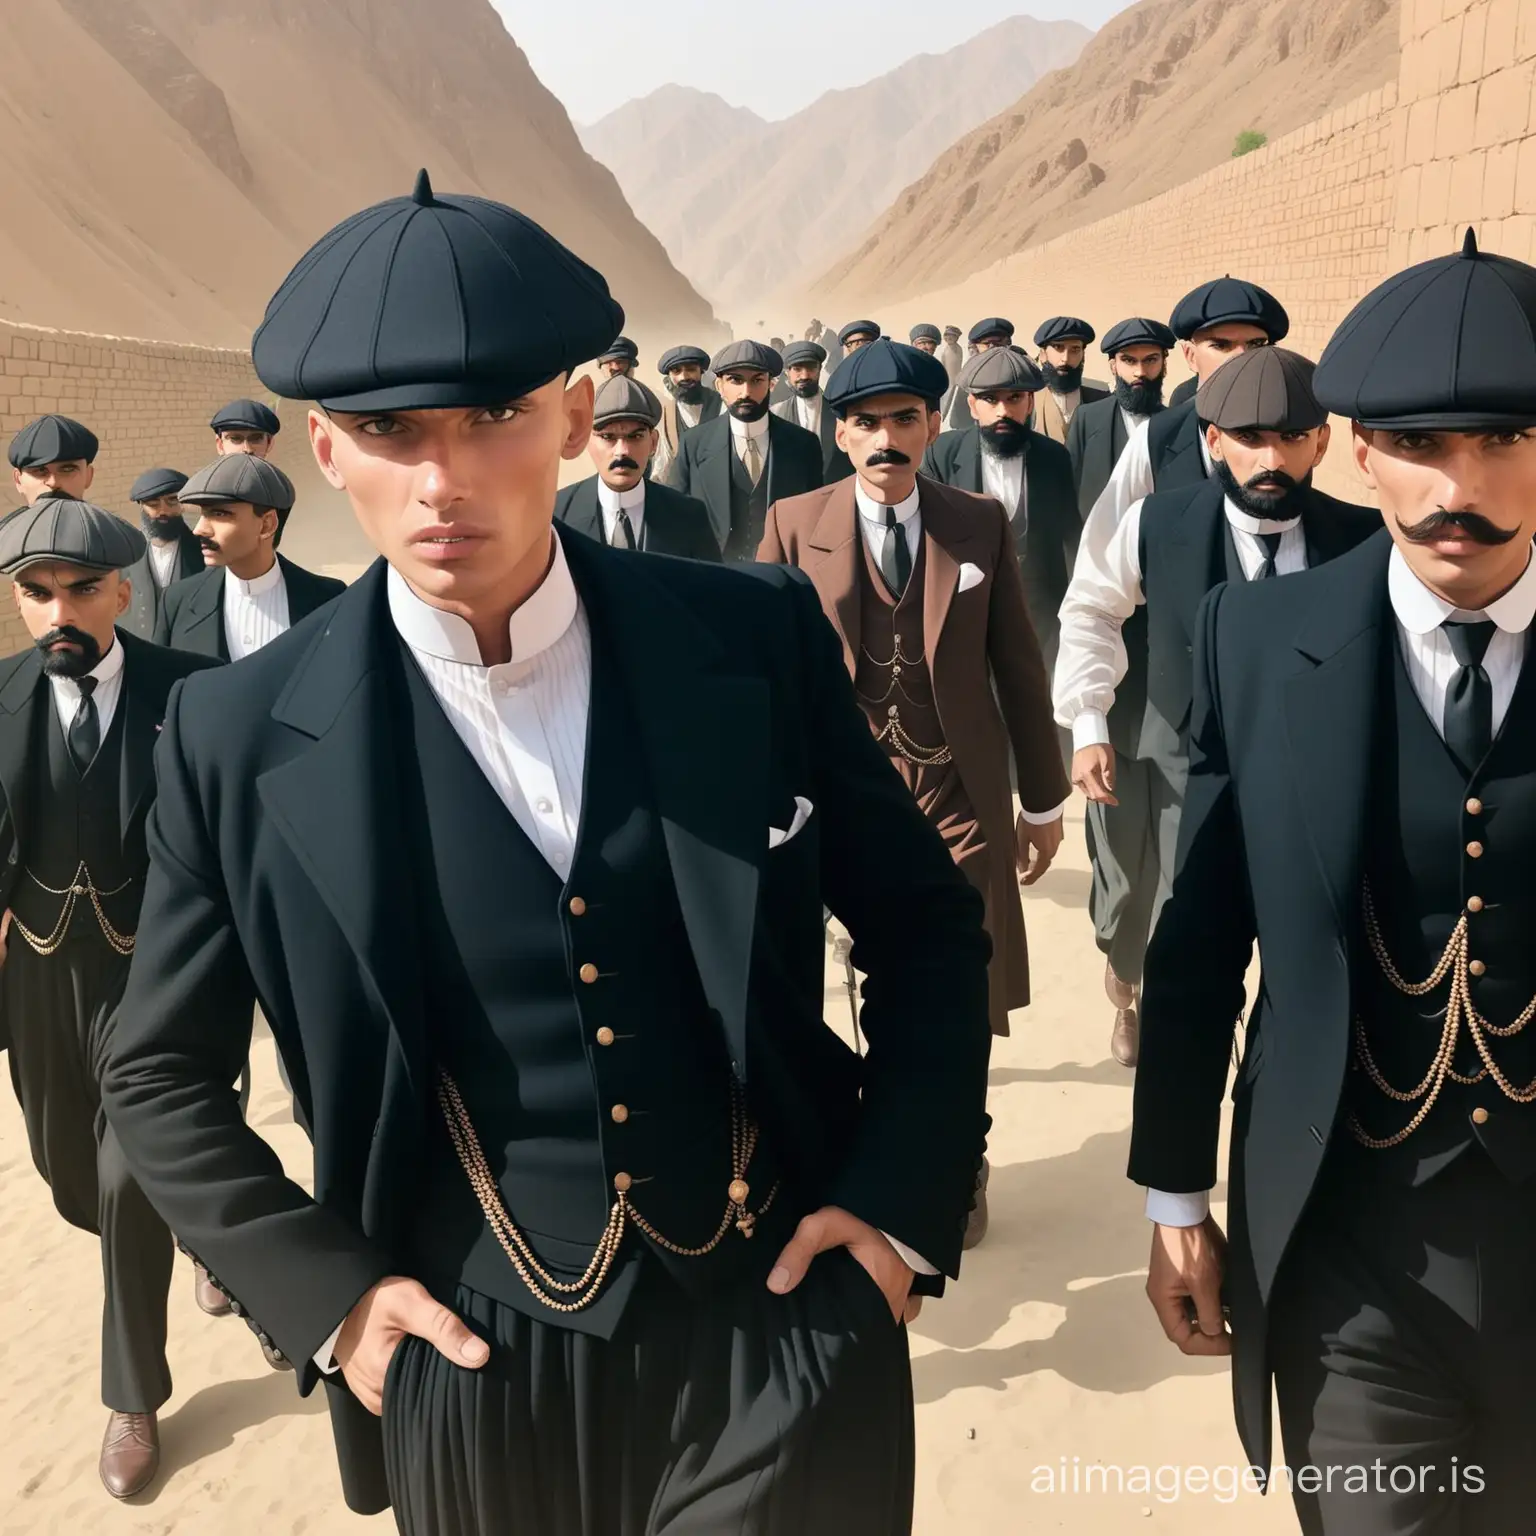 Stylish-Gangsters-of-Peaky-Blinders-Inspired-by-Pakistani-Culture